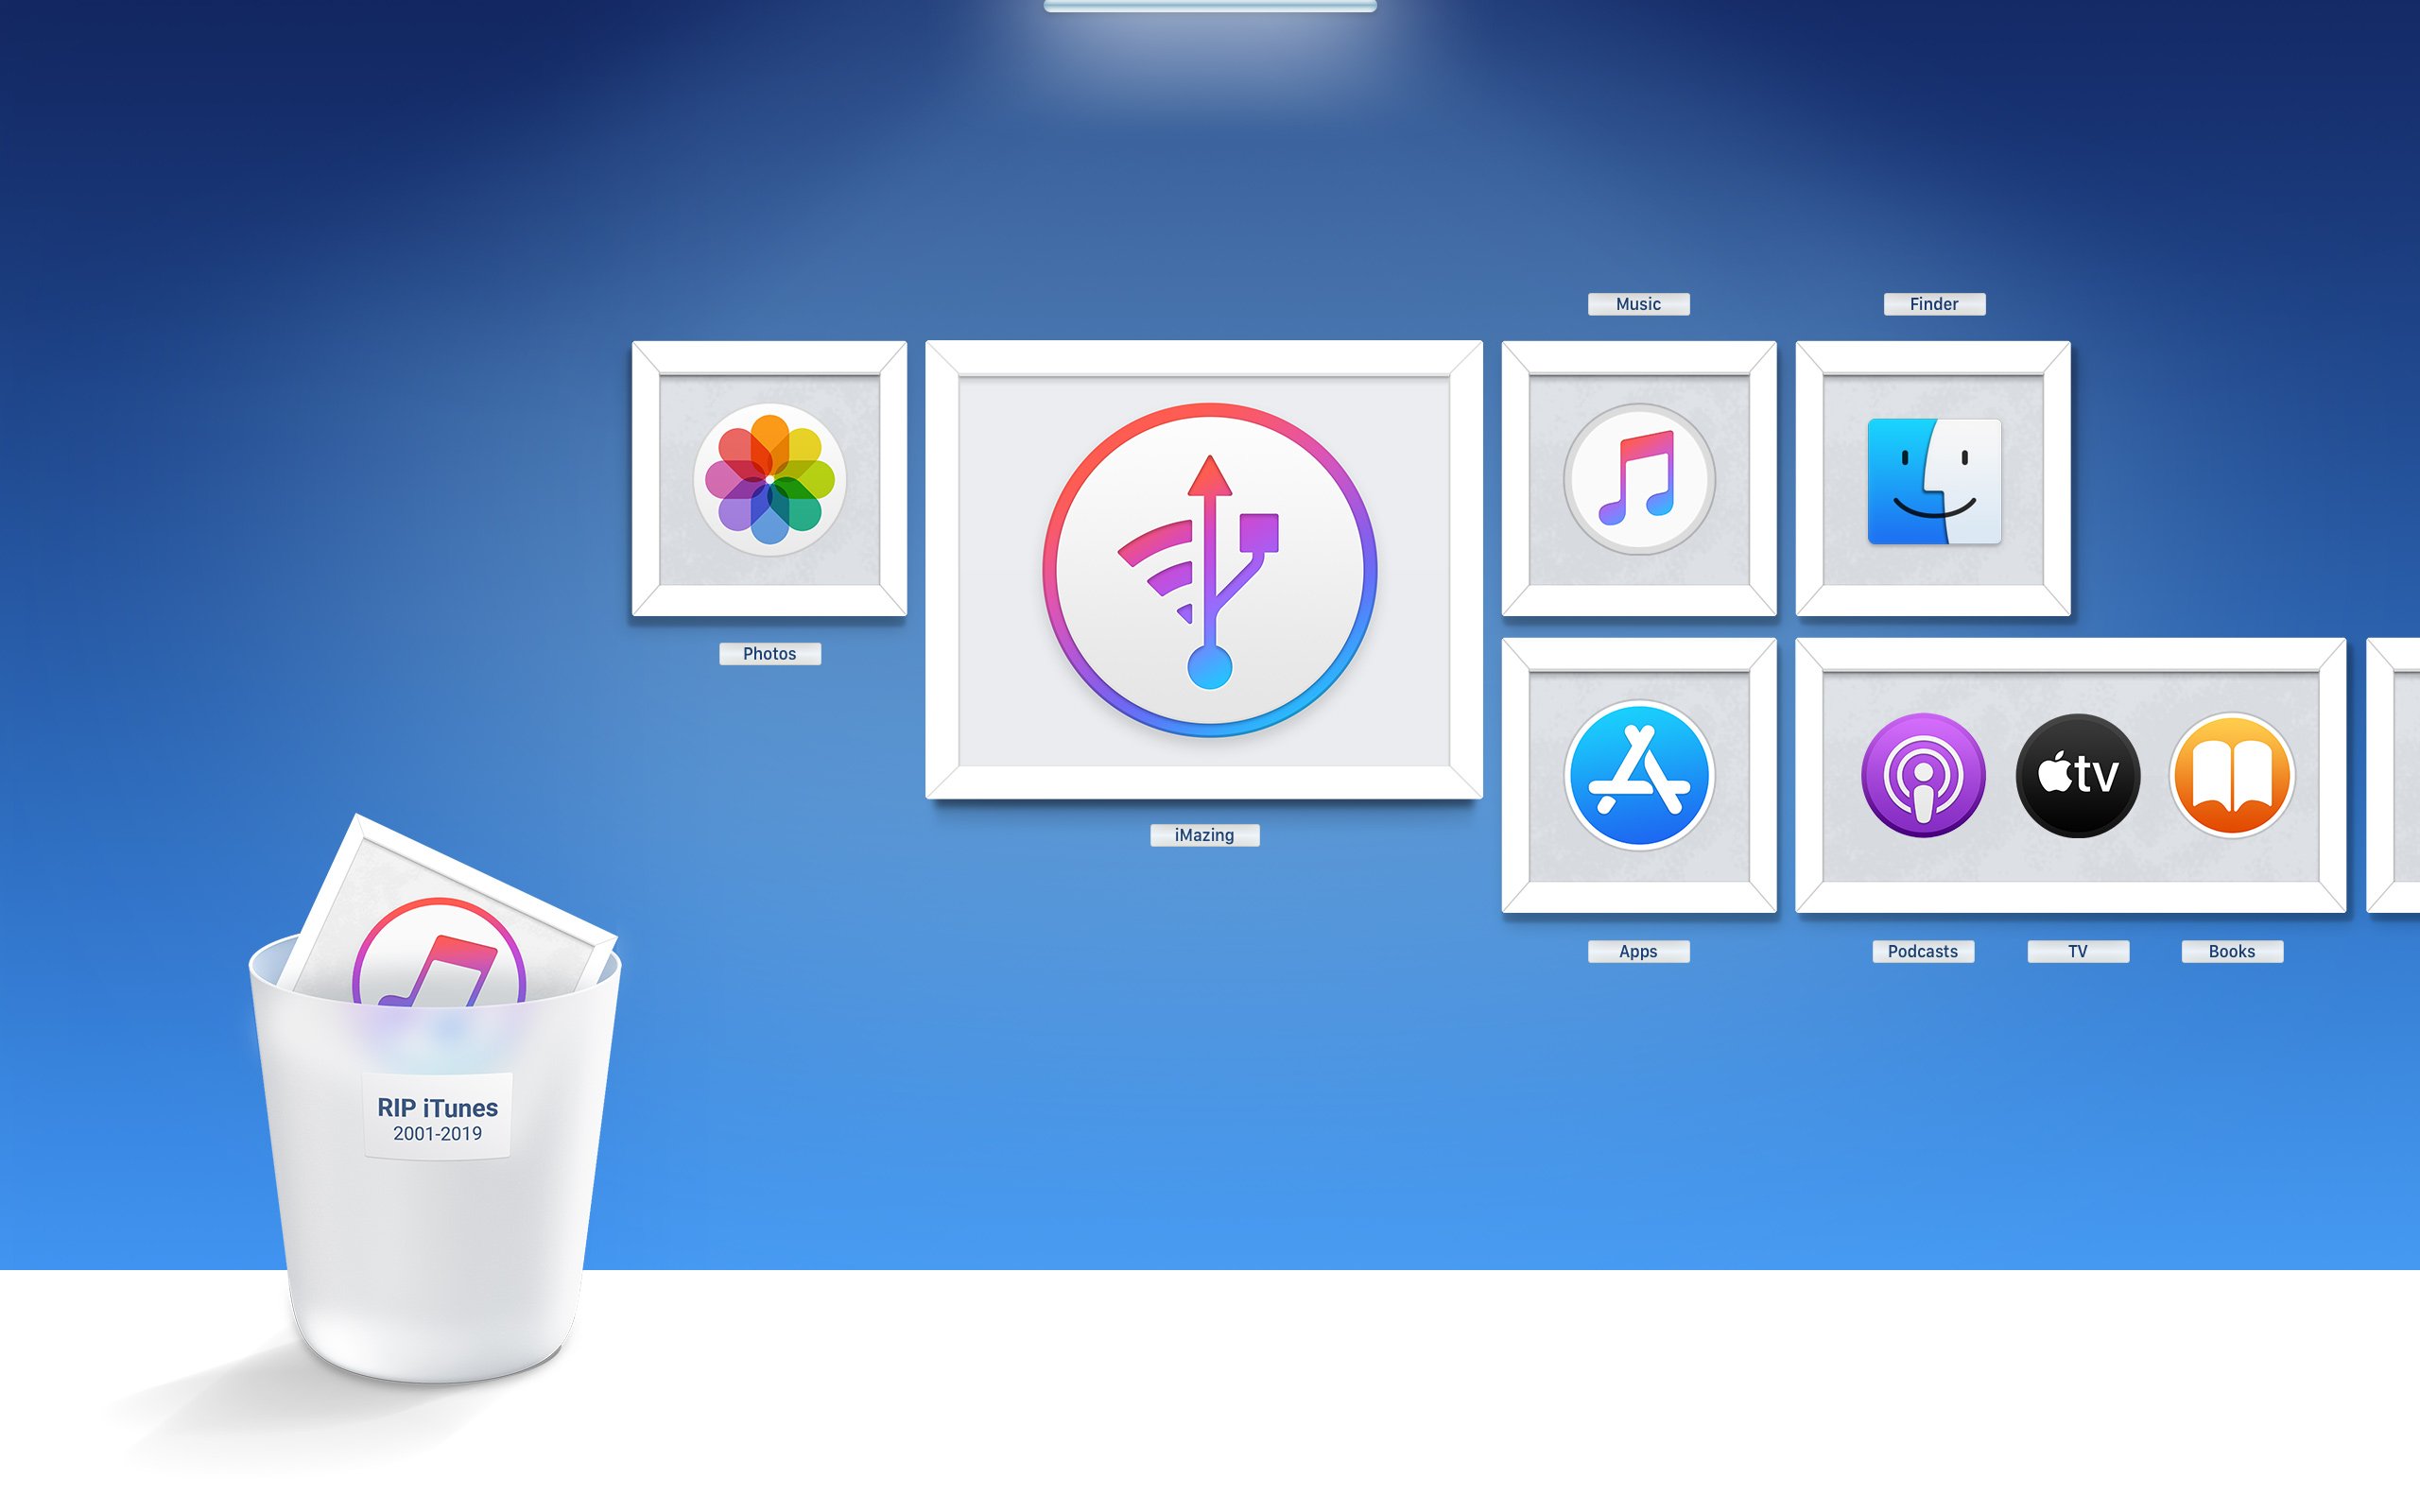 What are 'iTunes Alternatives' and why are they needed?